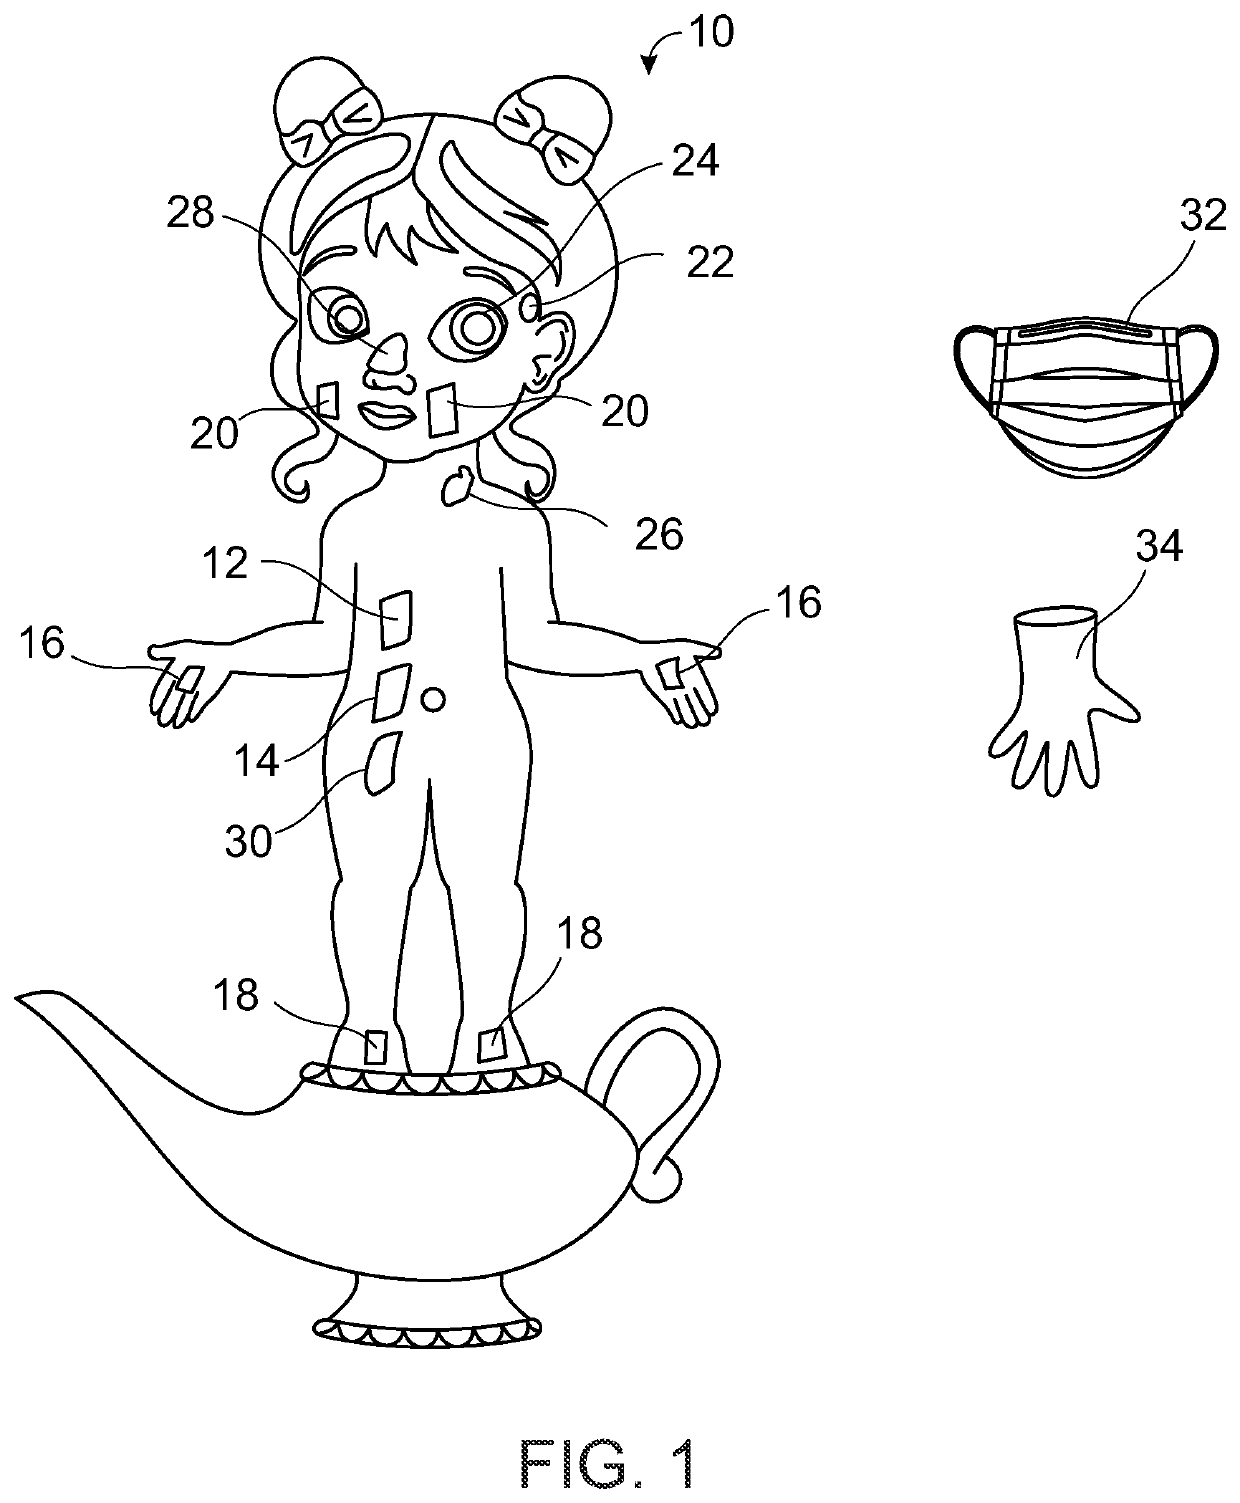 Hygiene doll apparatus and system and methods for practicing hygiene thereof